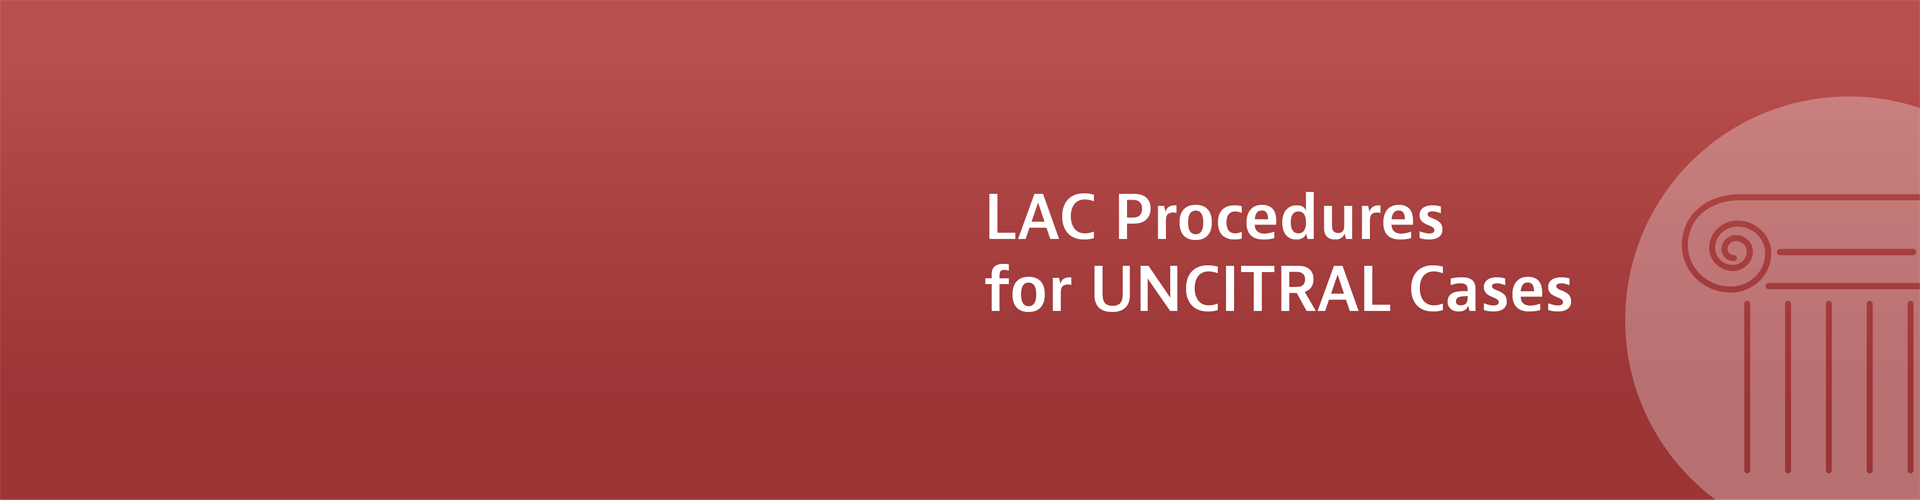 Administered UNCITRAL arbitration at LAC